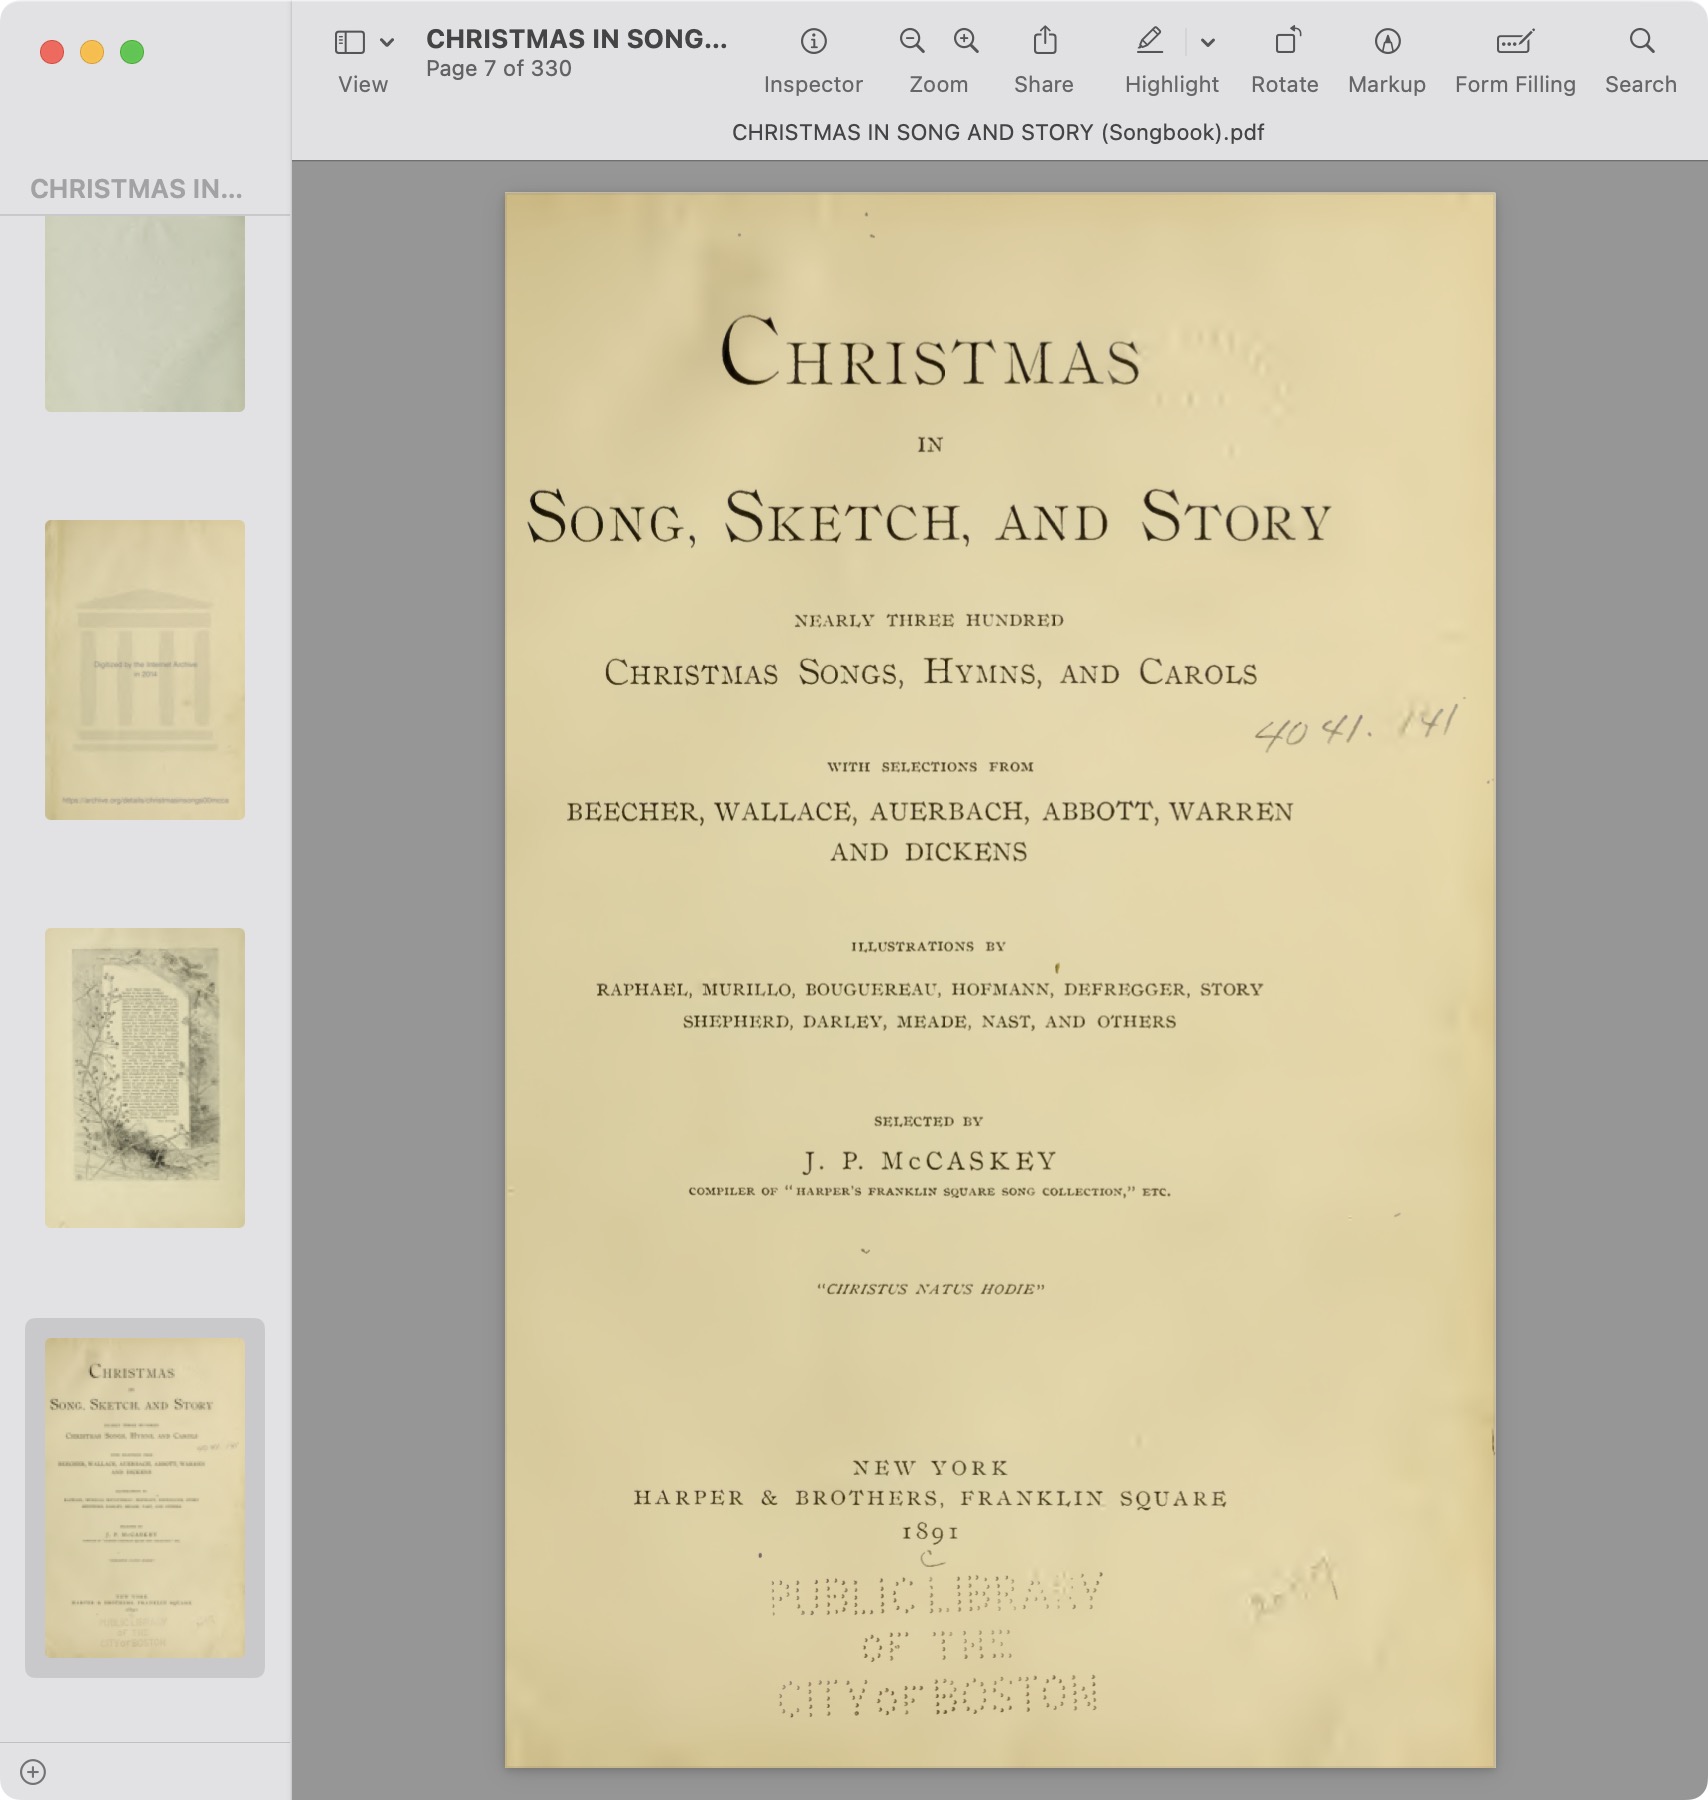 CHRISTMAS IN SONG AND STORY (Songbook).jpg